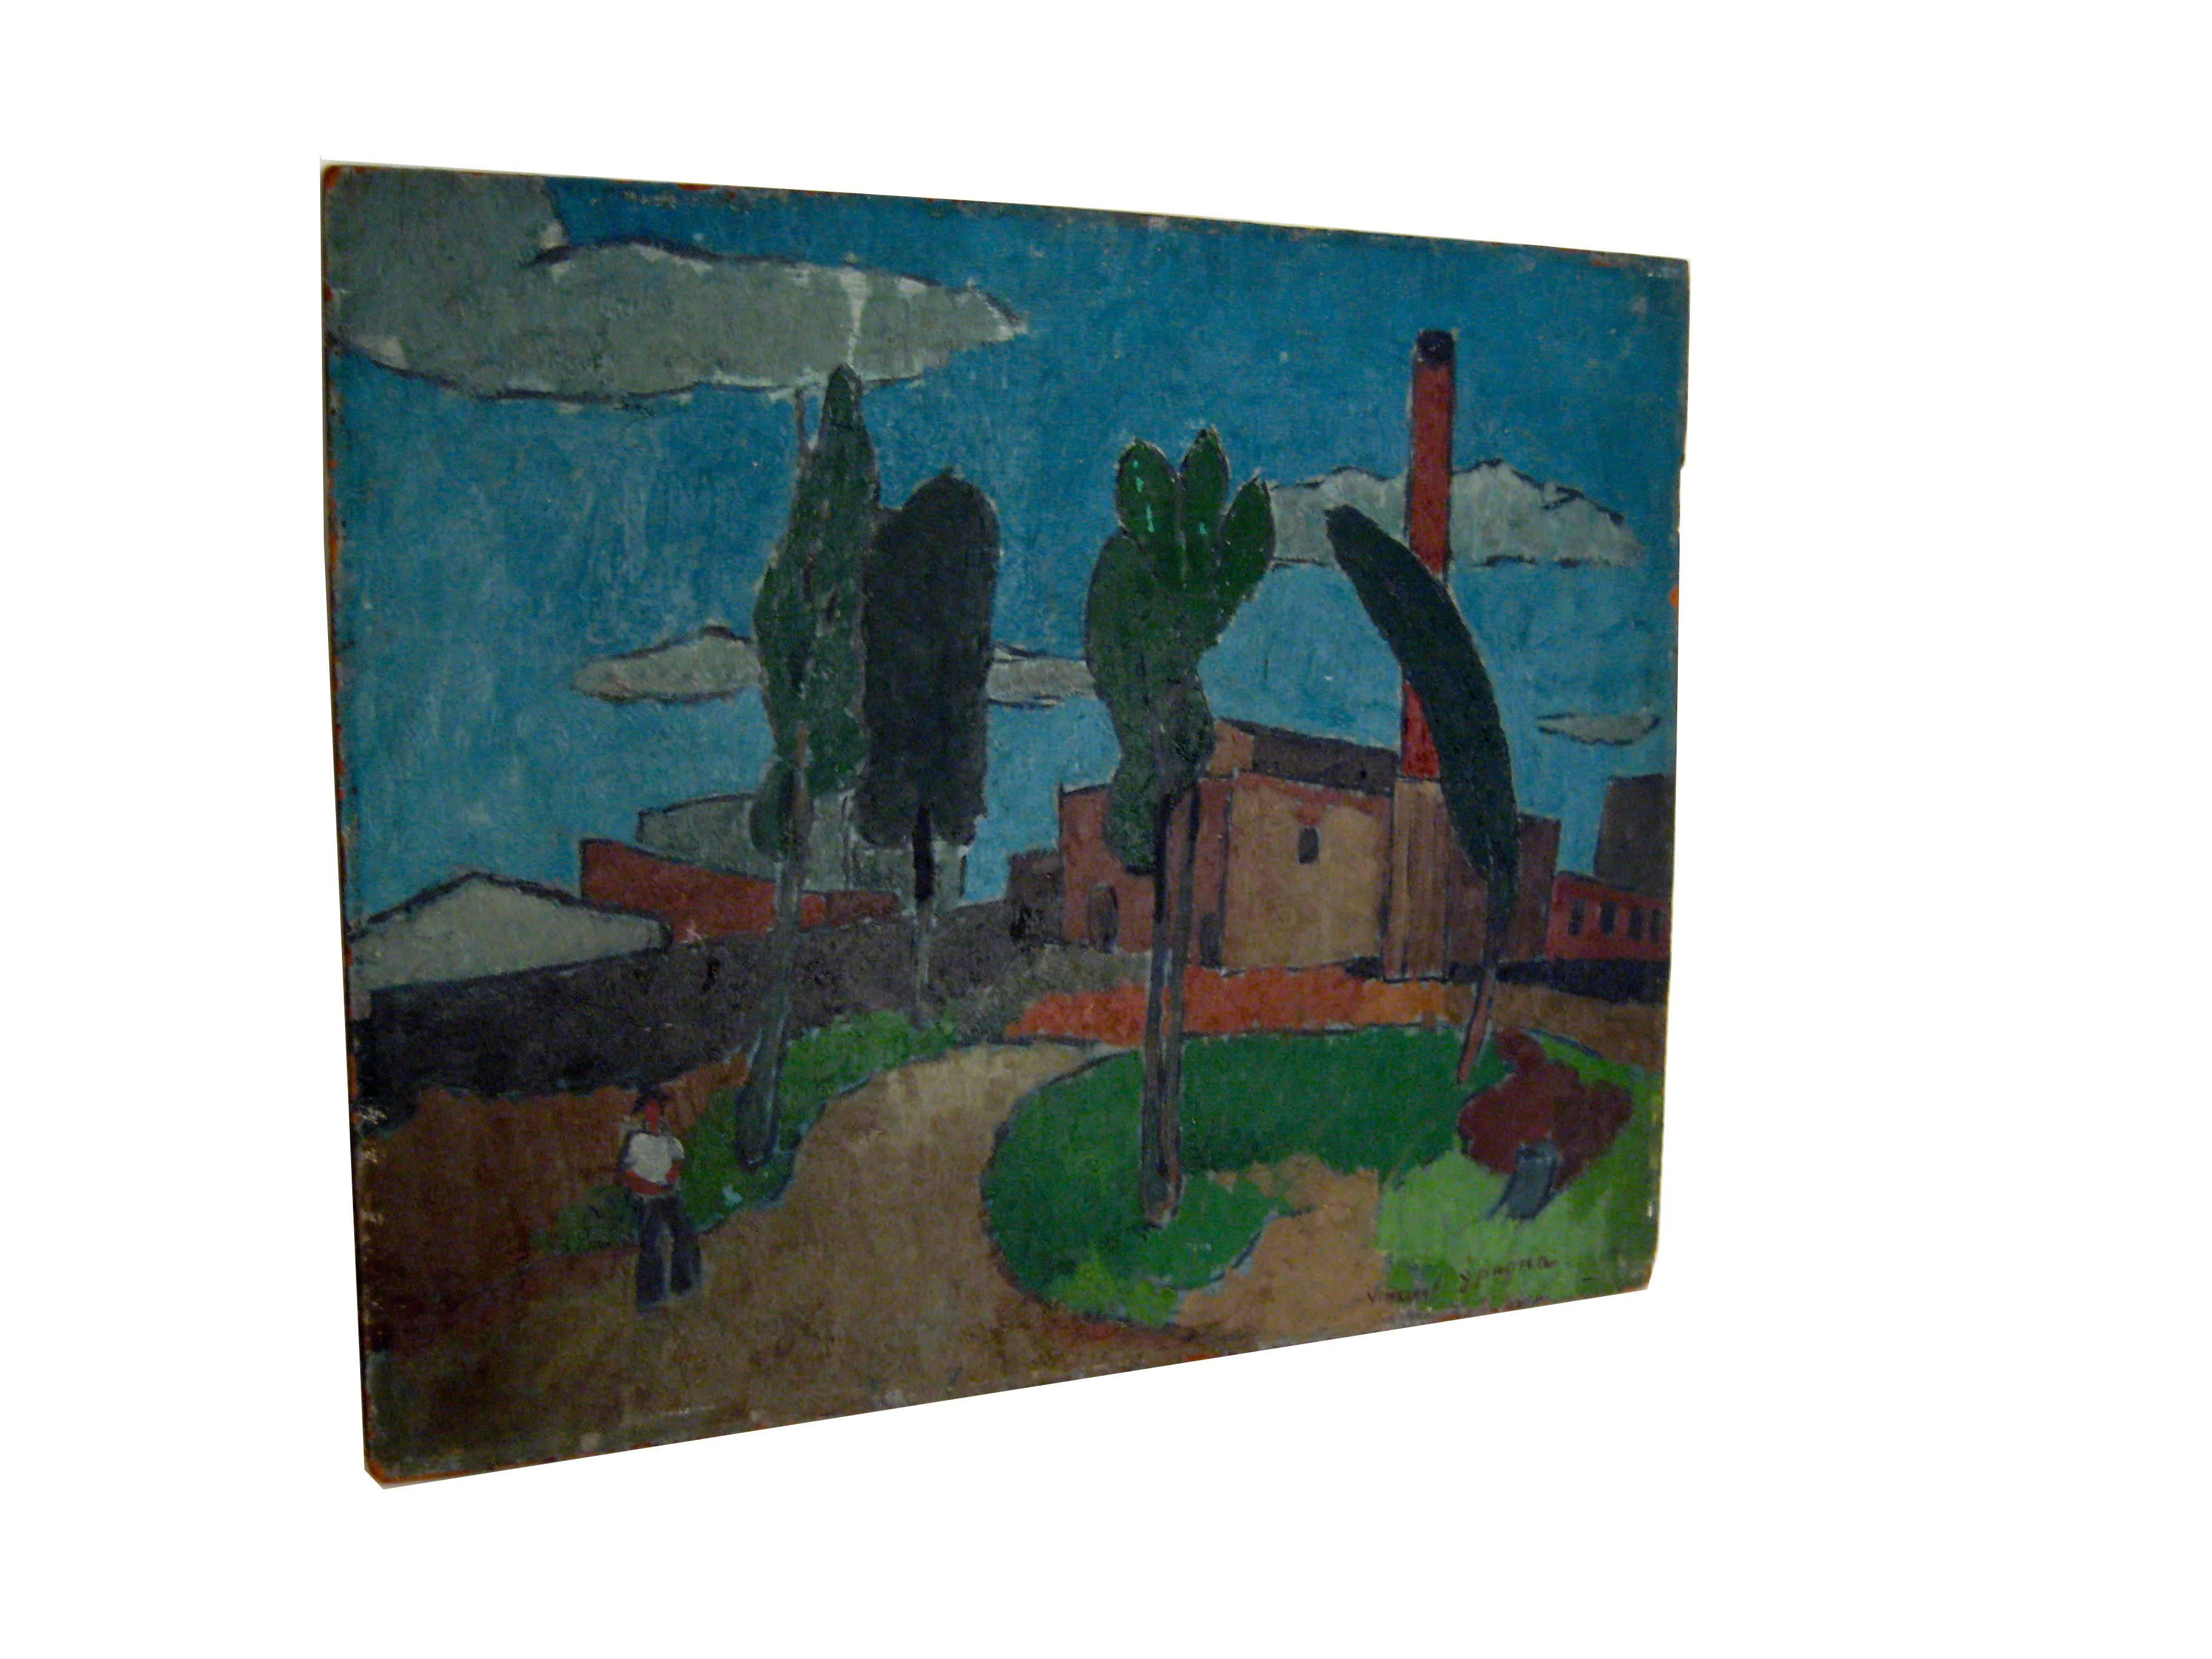 Modernist oil on masonite painting by Vincent Spagna (1898-?). circa 1940. Very good original condition. Some minor surface losses around the edge.